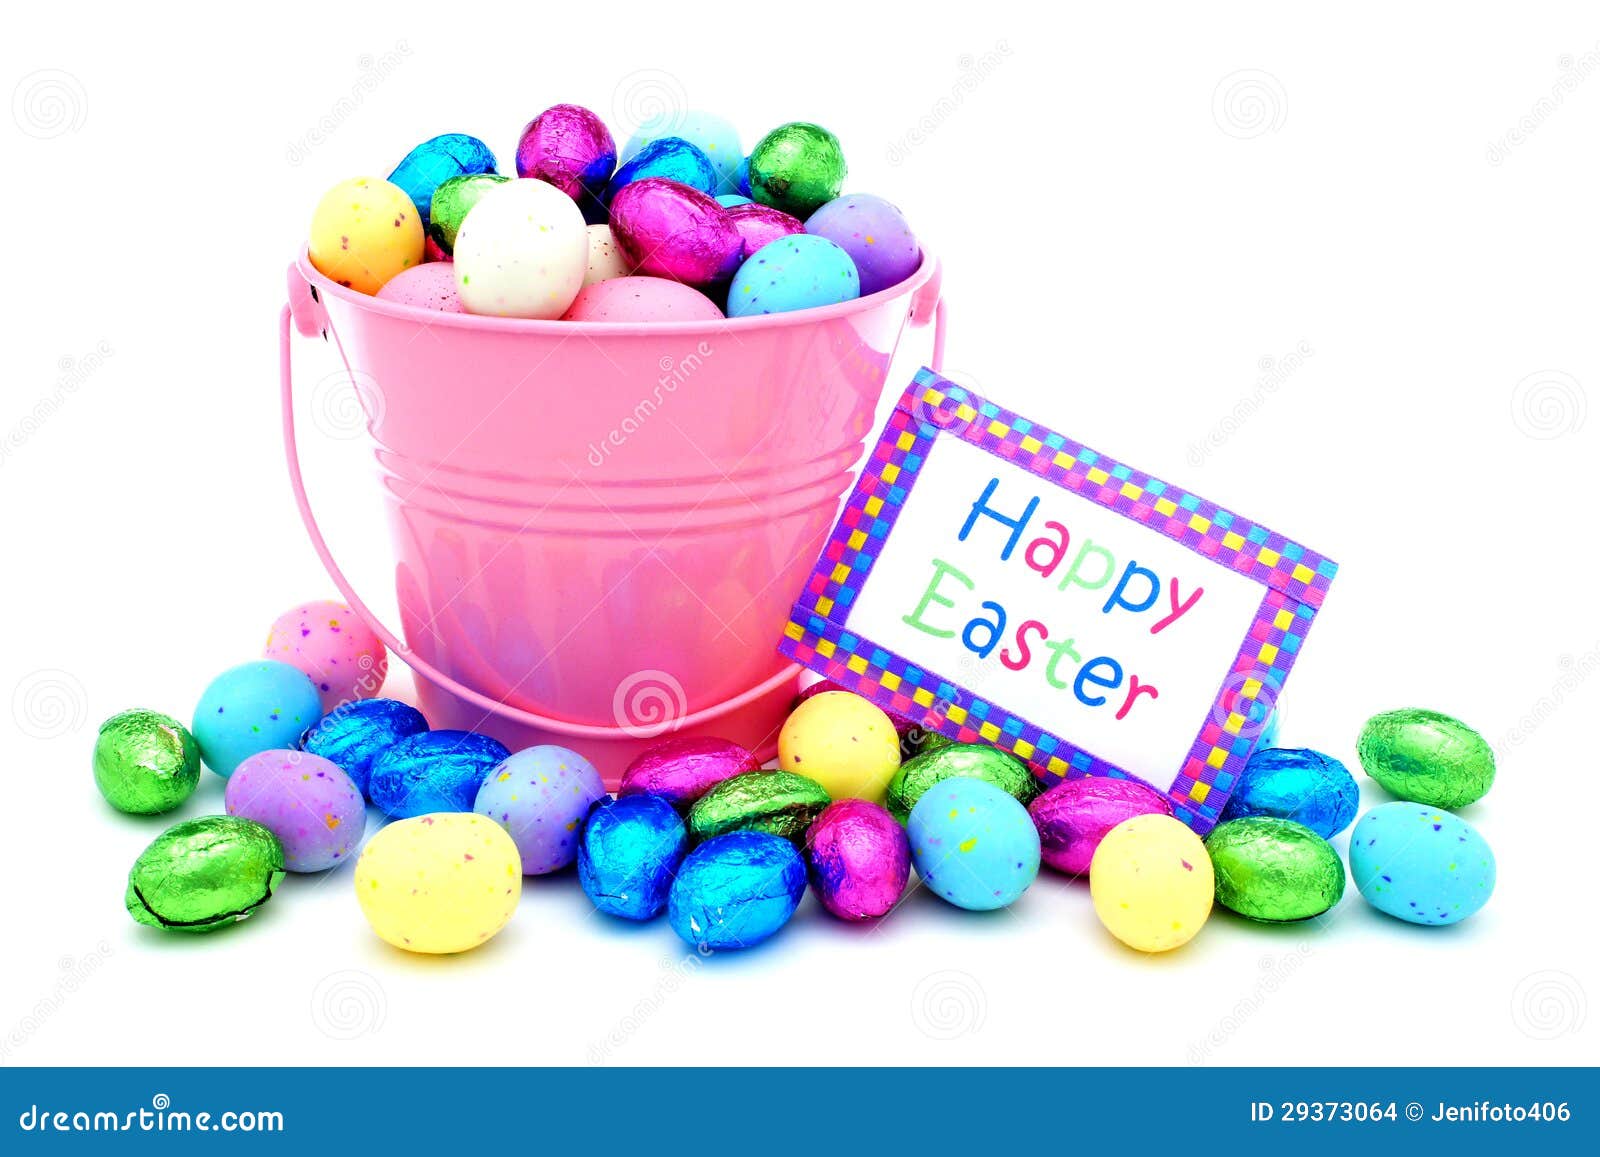 clip art easter candy - photo #17